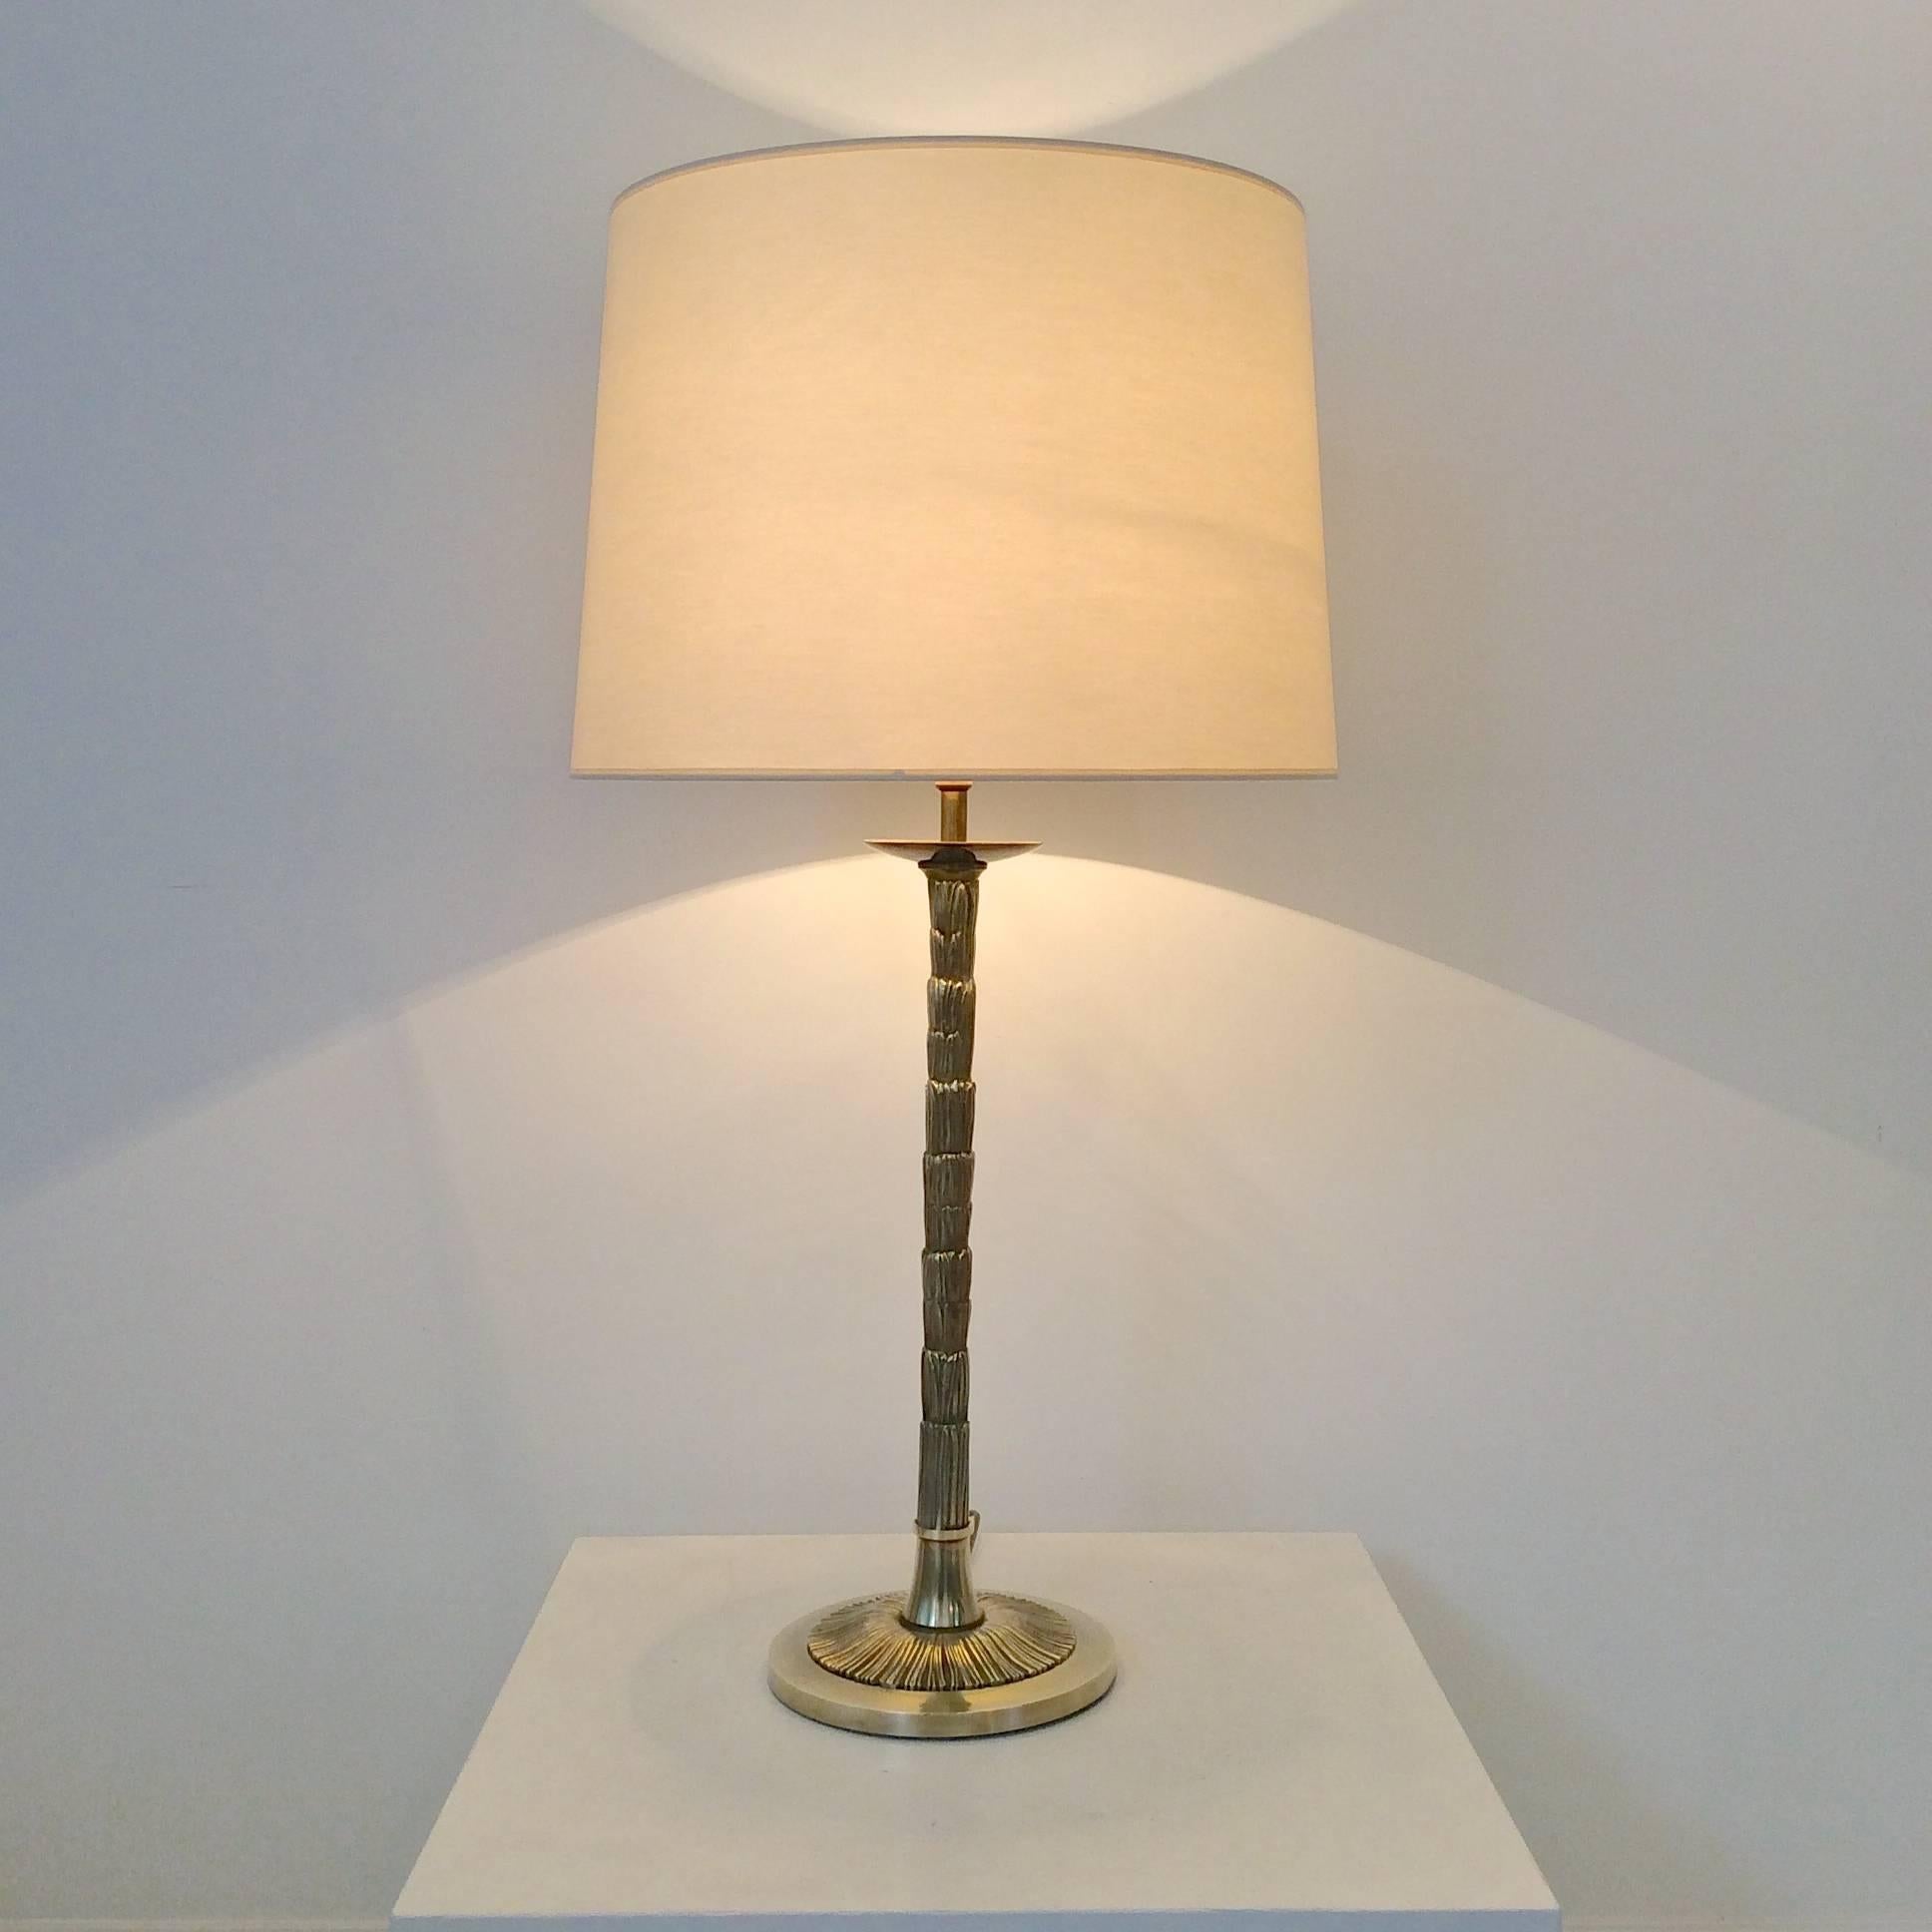 Maison Baguès gilt bronze, table lamp, circa 1950, France.
Leaves decor, new ivory fabric shade.
Dimensions: 75 cm H, diameter of the shade: 40 cm, diameter of the base: 19 cm.
One E27 bulb of 60 W. Rewired.
Good original condition.